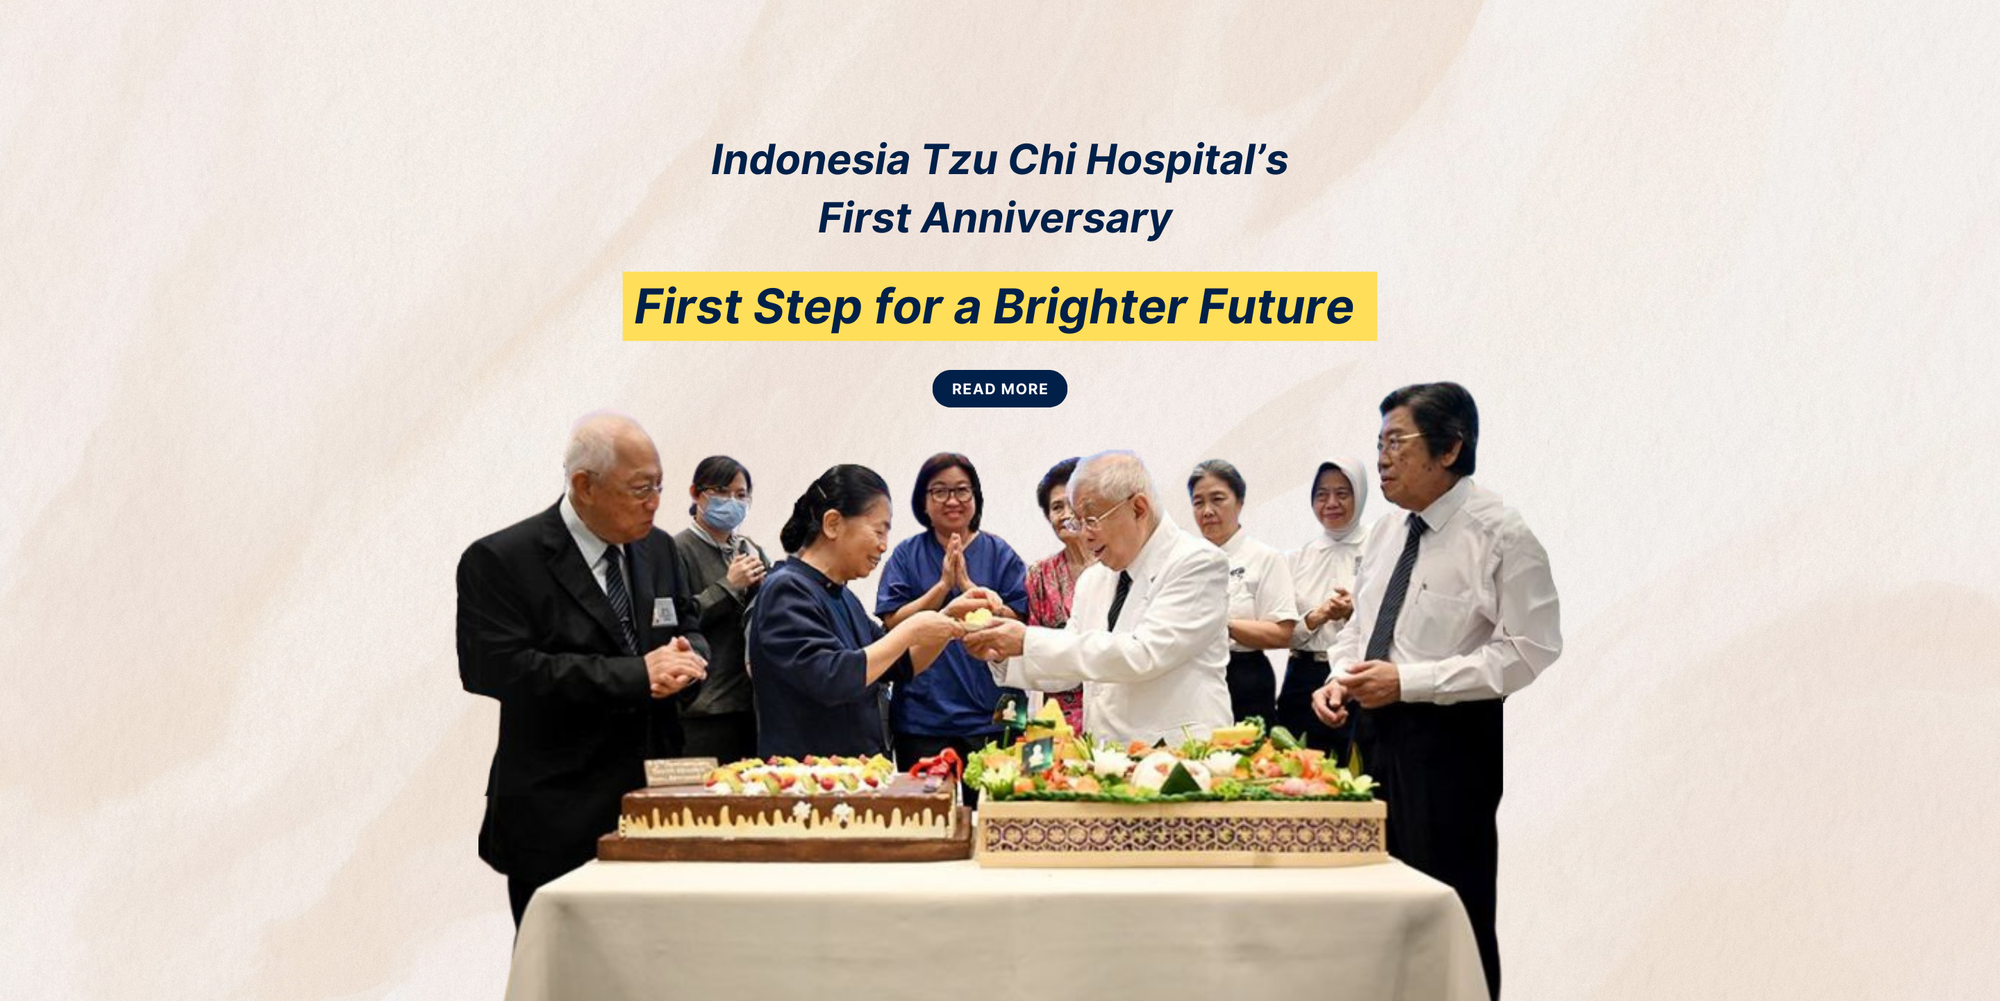 Indonesia Tzu Chi Hospital’s First Anniversary:  First Step for a Brighter Future